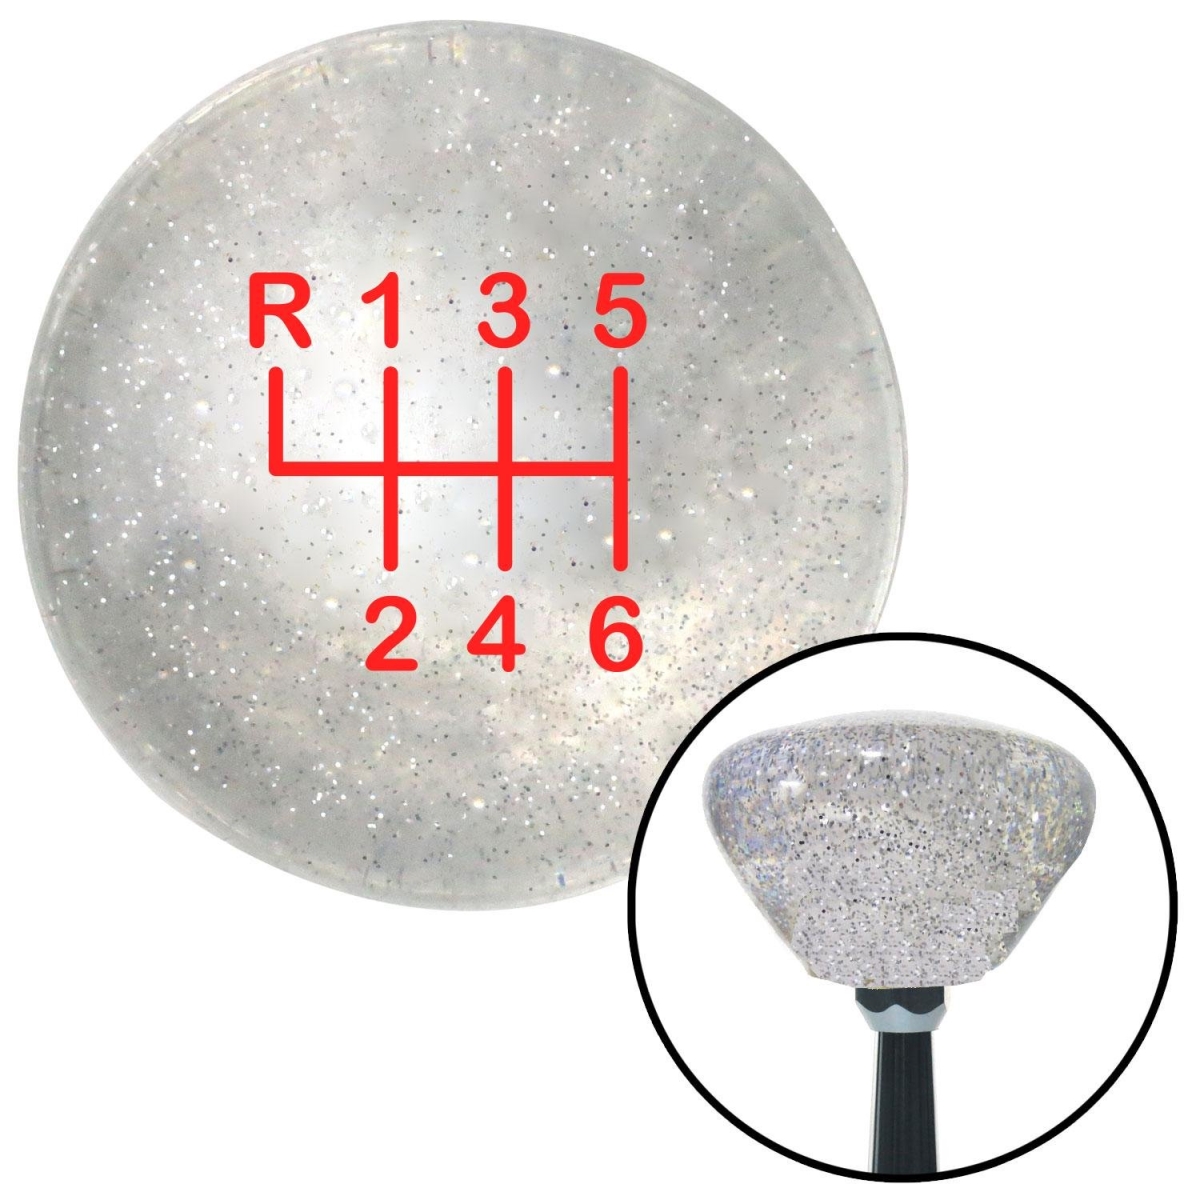 American Shifter 167505 Red Shift Pattern 25n Clear Retro Metal Flake Shift Knob with M16 x 1.5 Insert Auto -  American Shifter Company